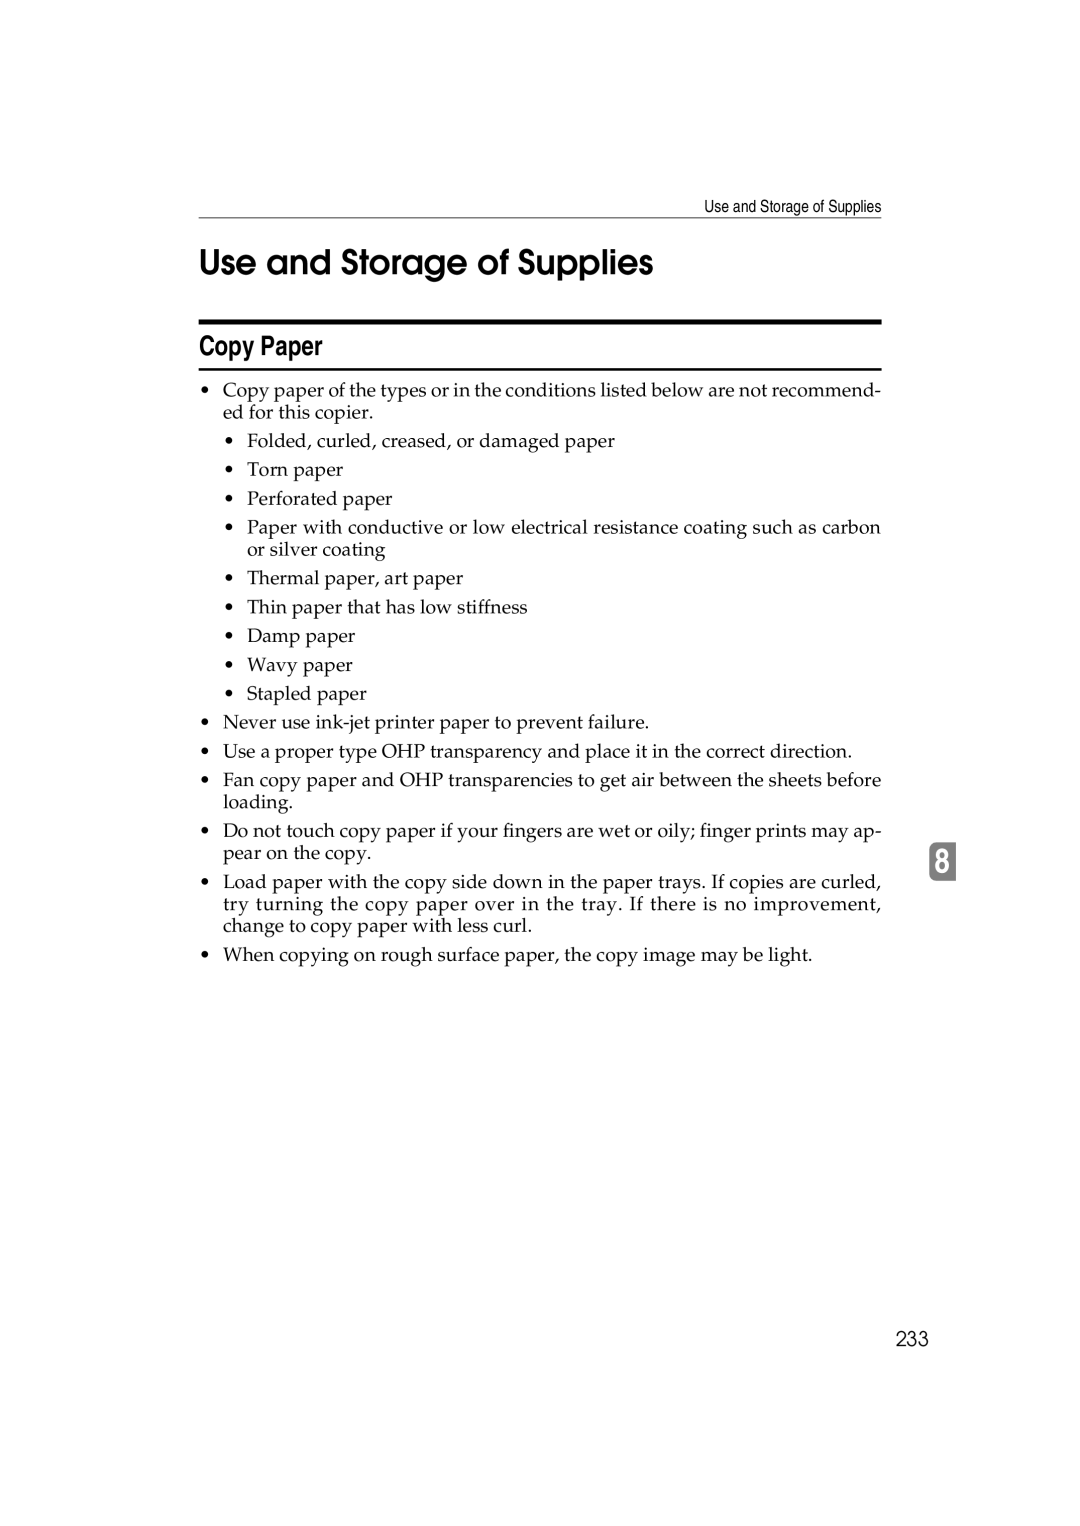 Ricoh 6513 manual Use and Storage of Supplies, Copy Paper, 233 